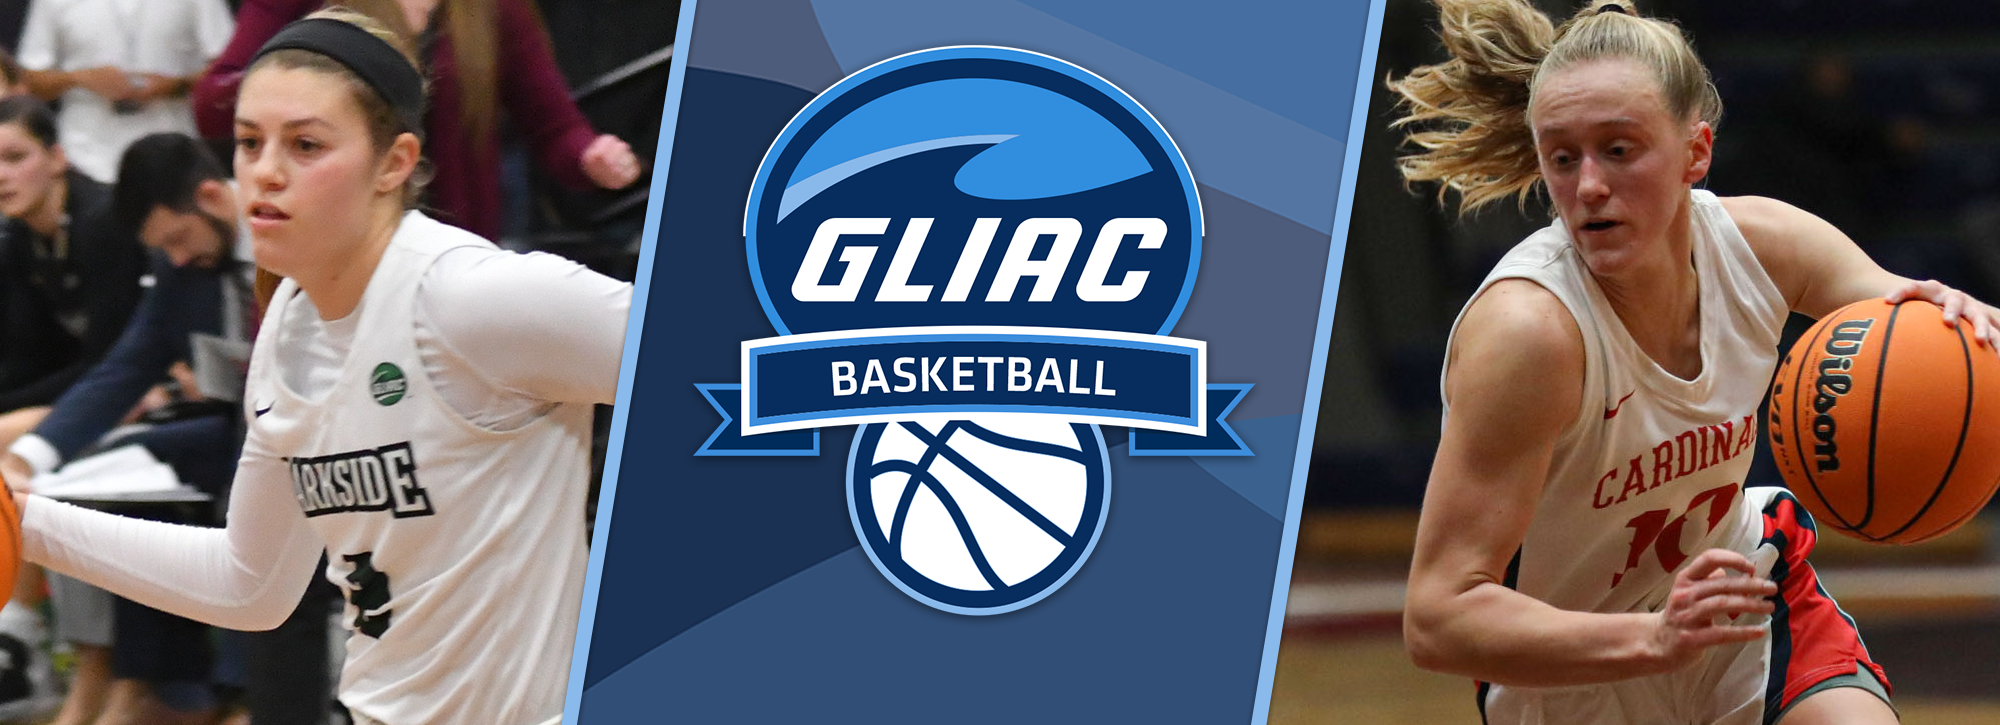 Parkside's Nelson and SVSU's Zarycki recognized with GLIAC Women's Basketball Player of the Week accolades